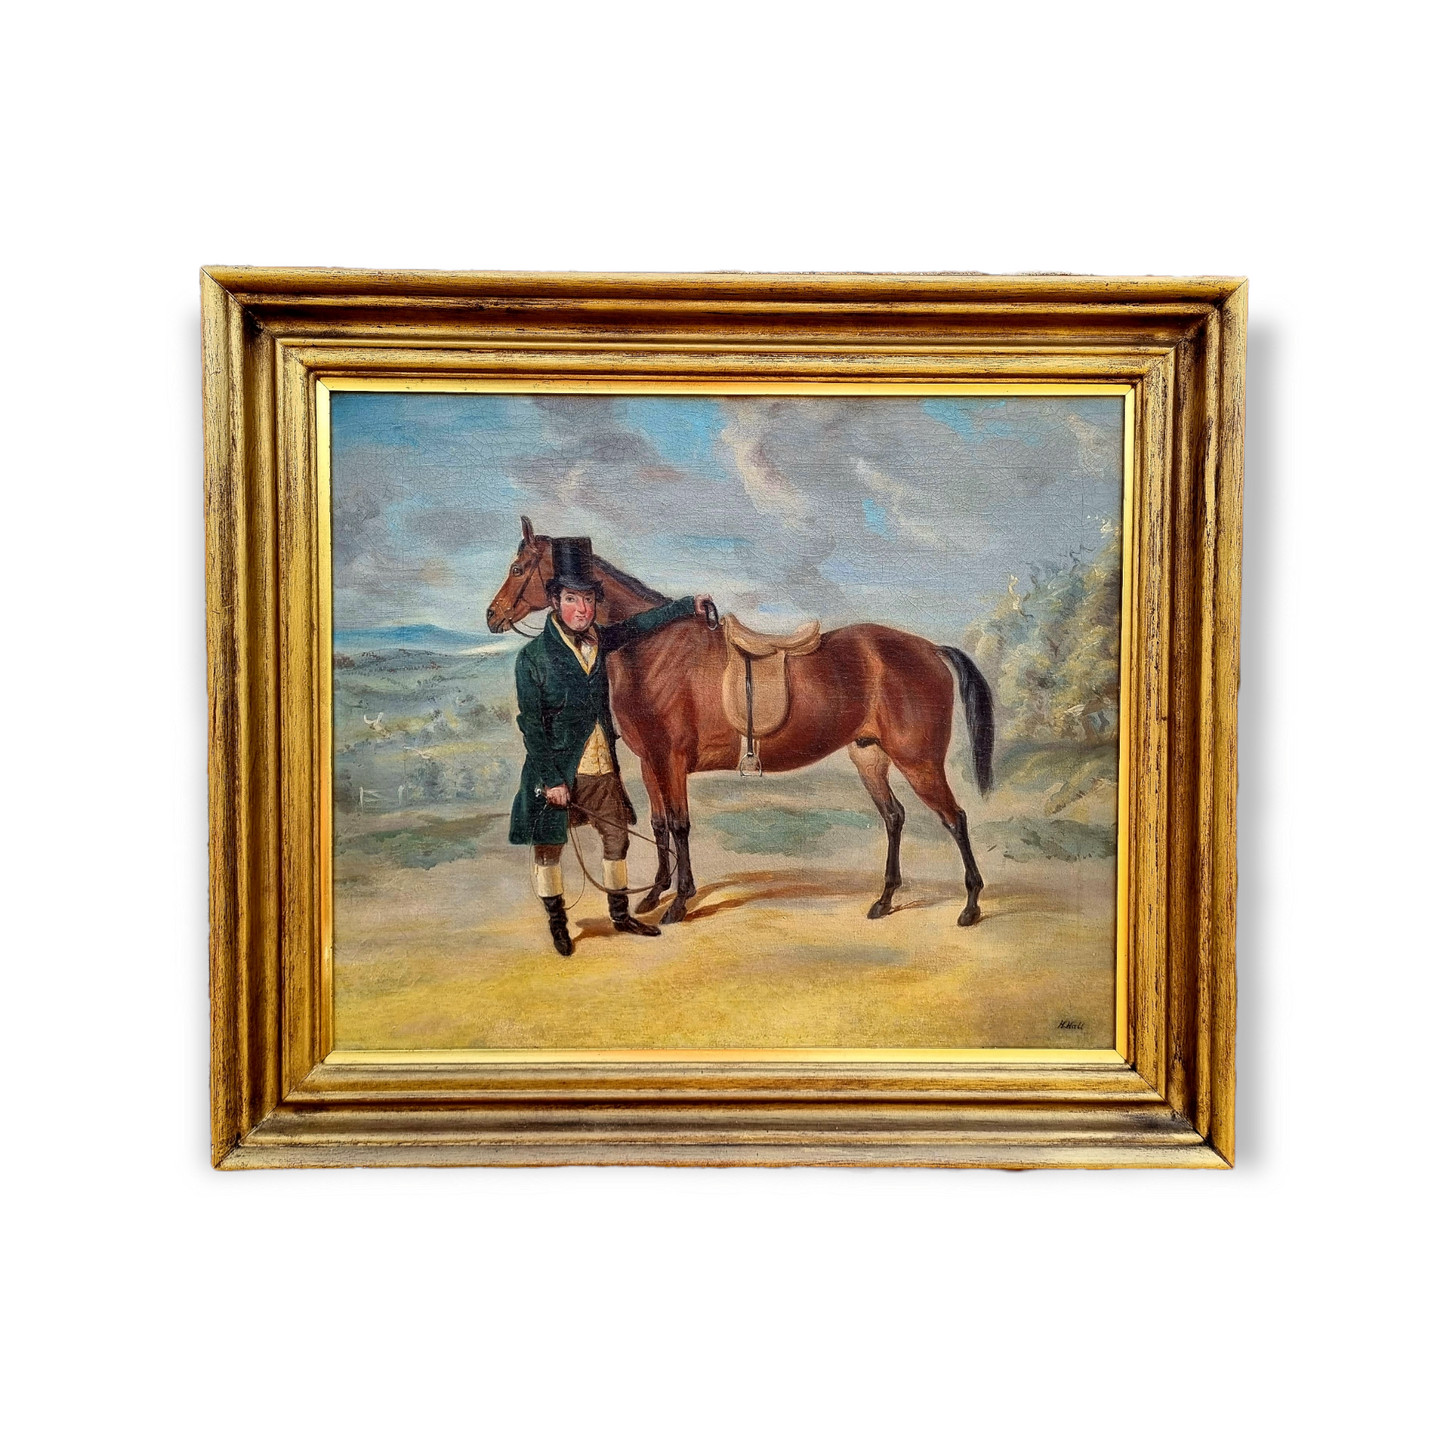 Mid 19th Century English School Antique Oil Portrait Painting of a Gentleman Farmer and His Prize Horse, Signed "H Hall"